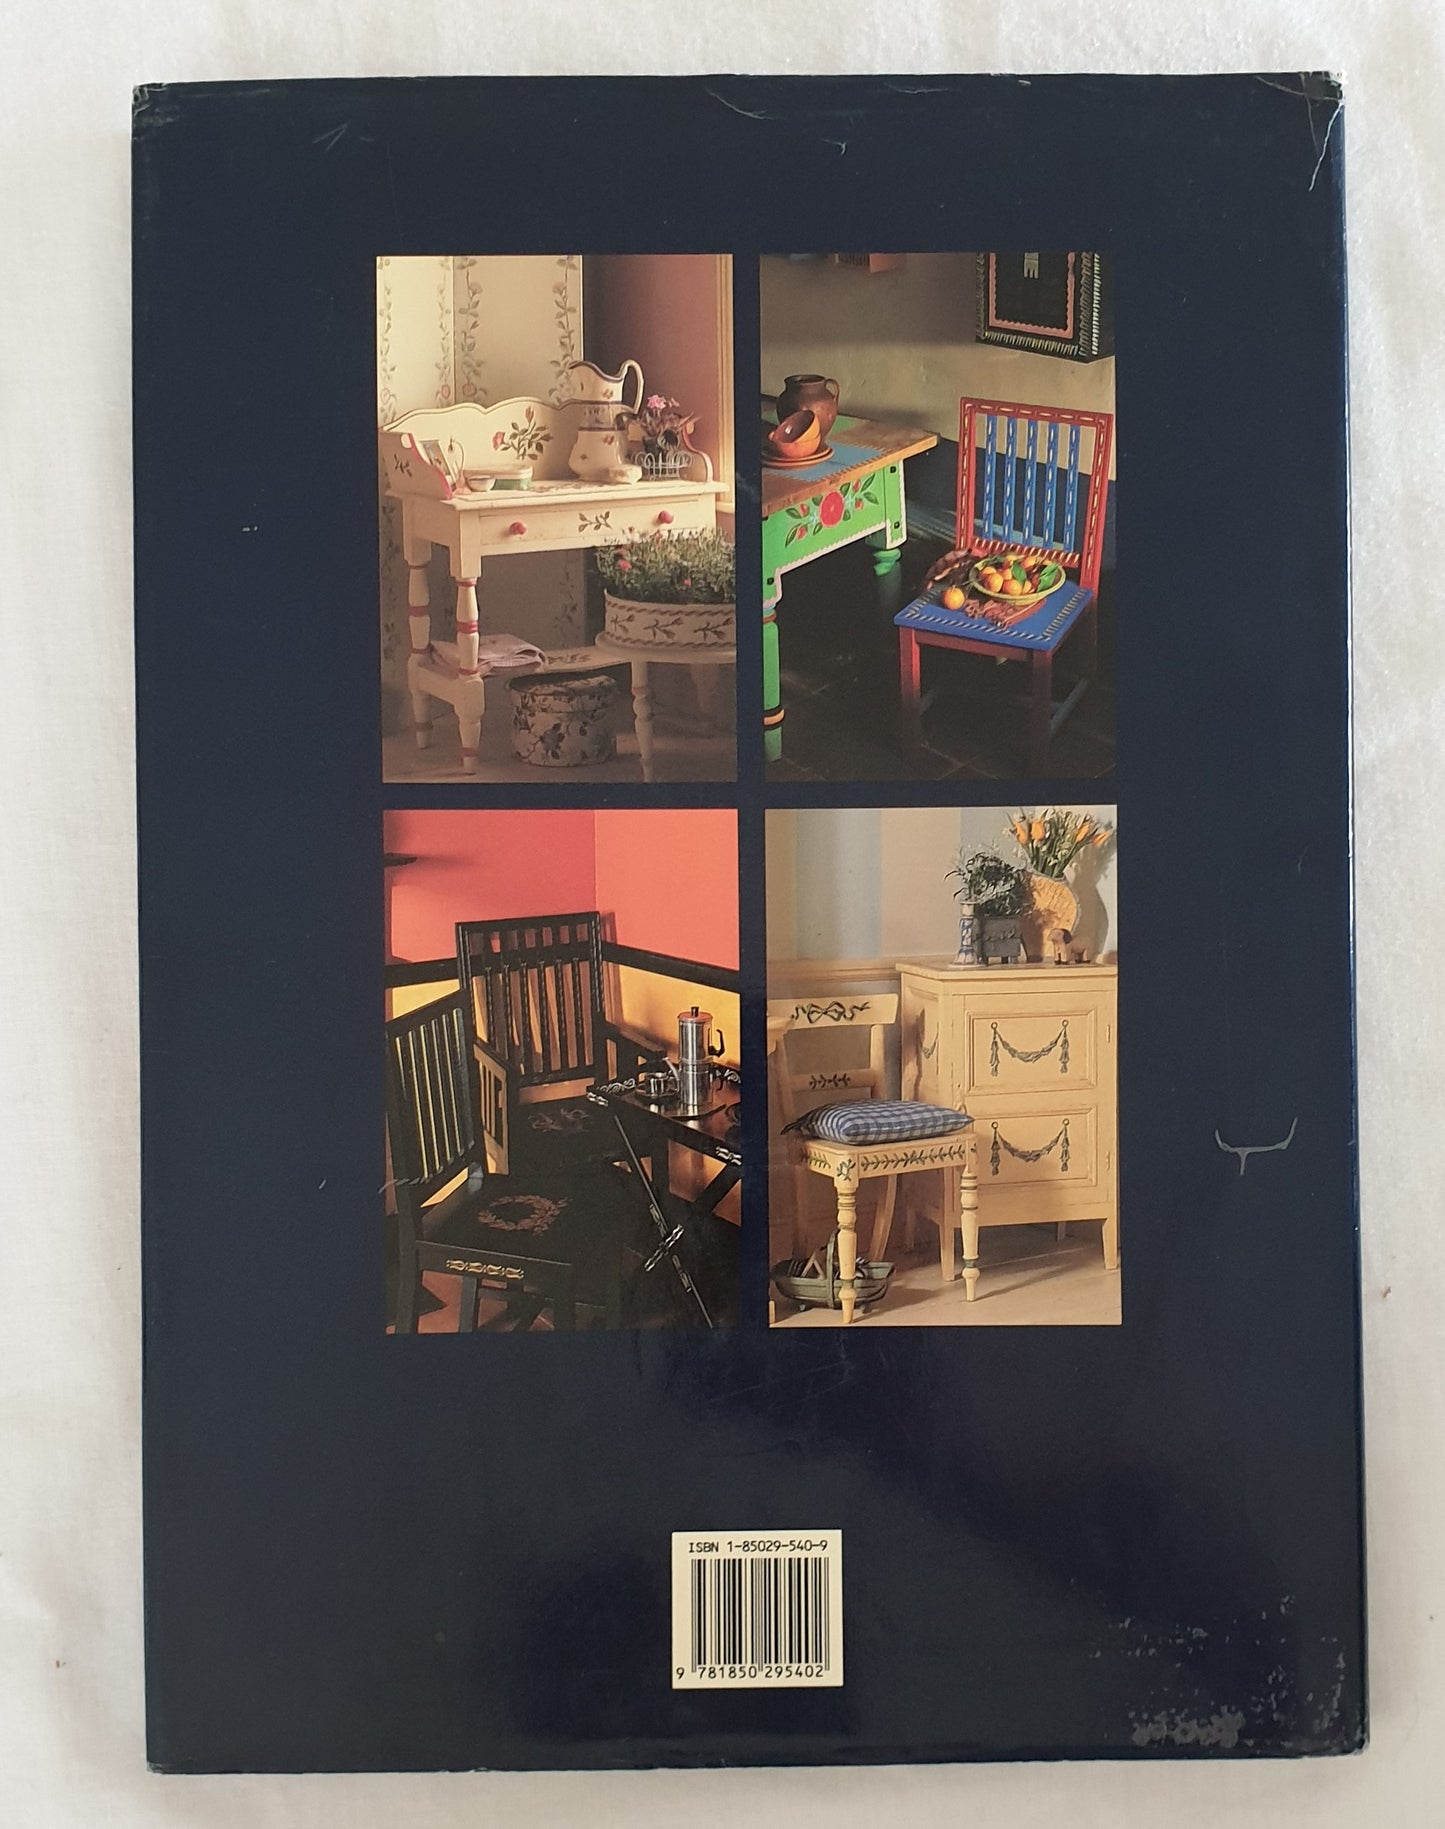 The Complete Painted Furniture Manual by Jocasta Innes and Stewart Walton